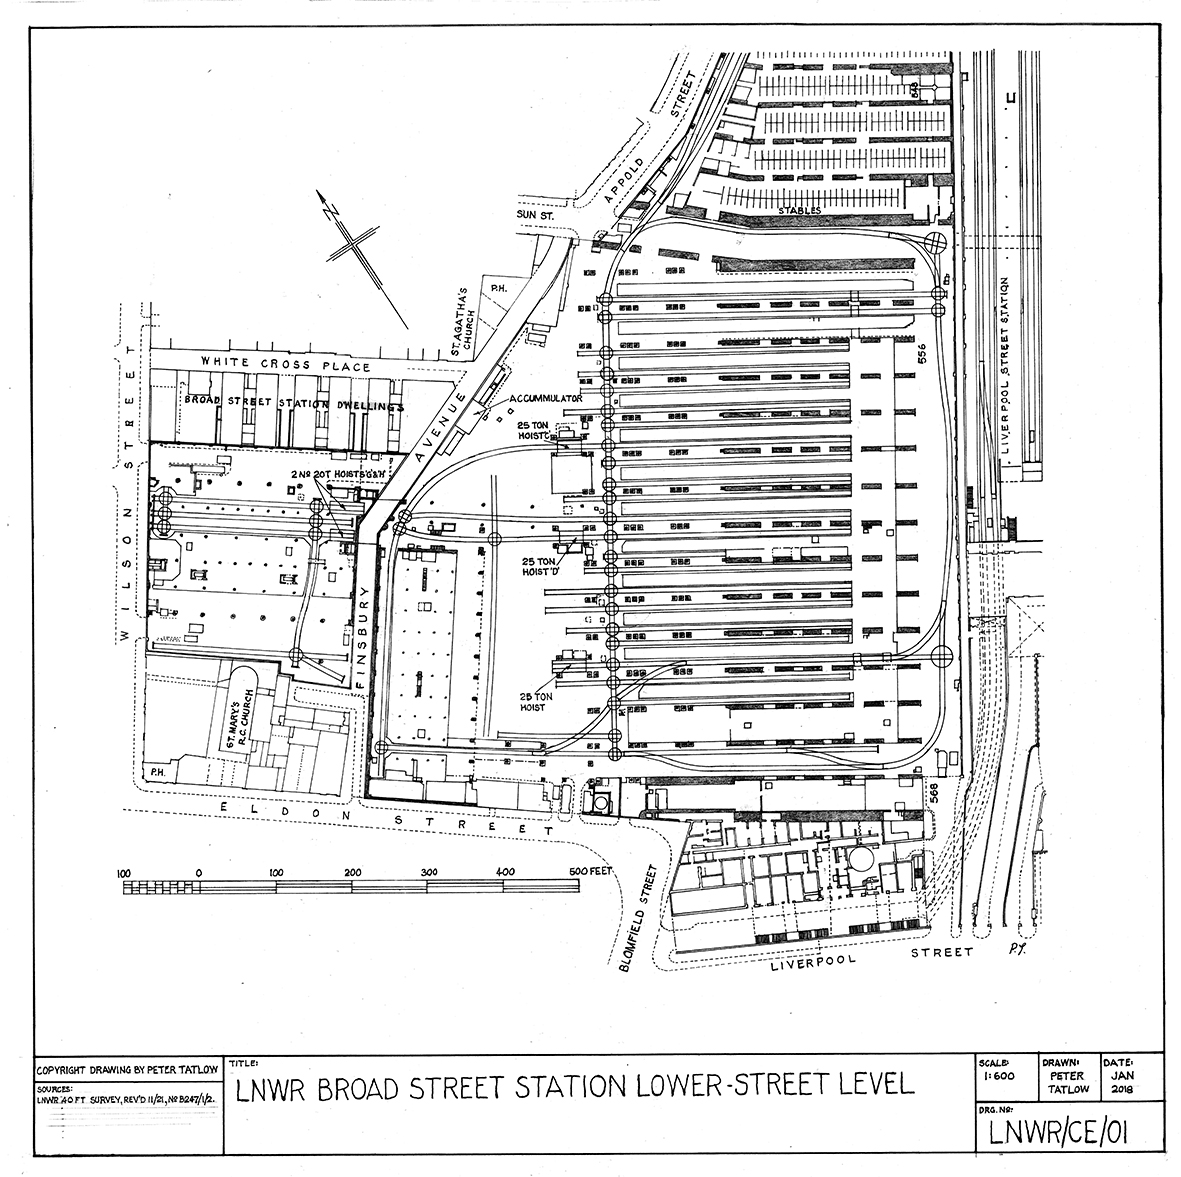 Plan of Broad Street station lower level at street level